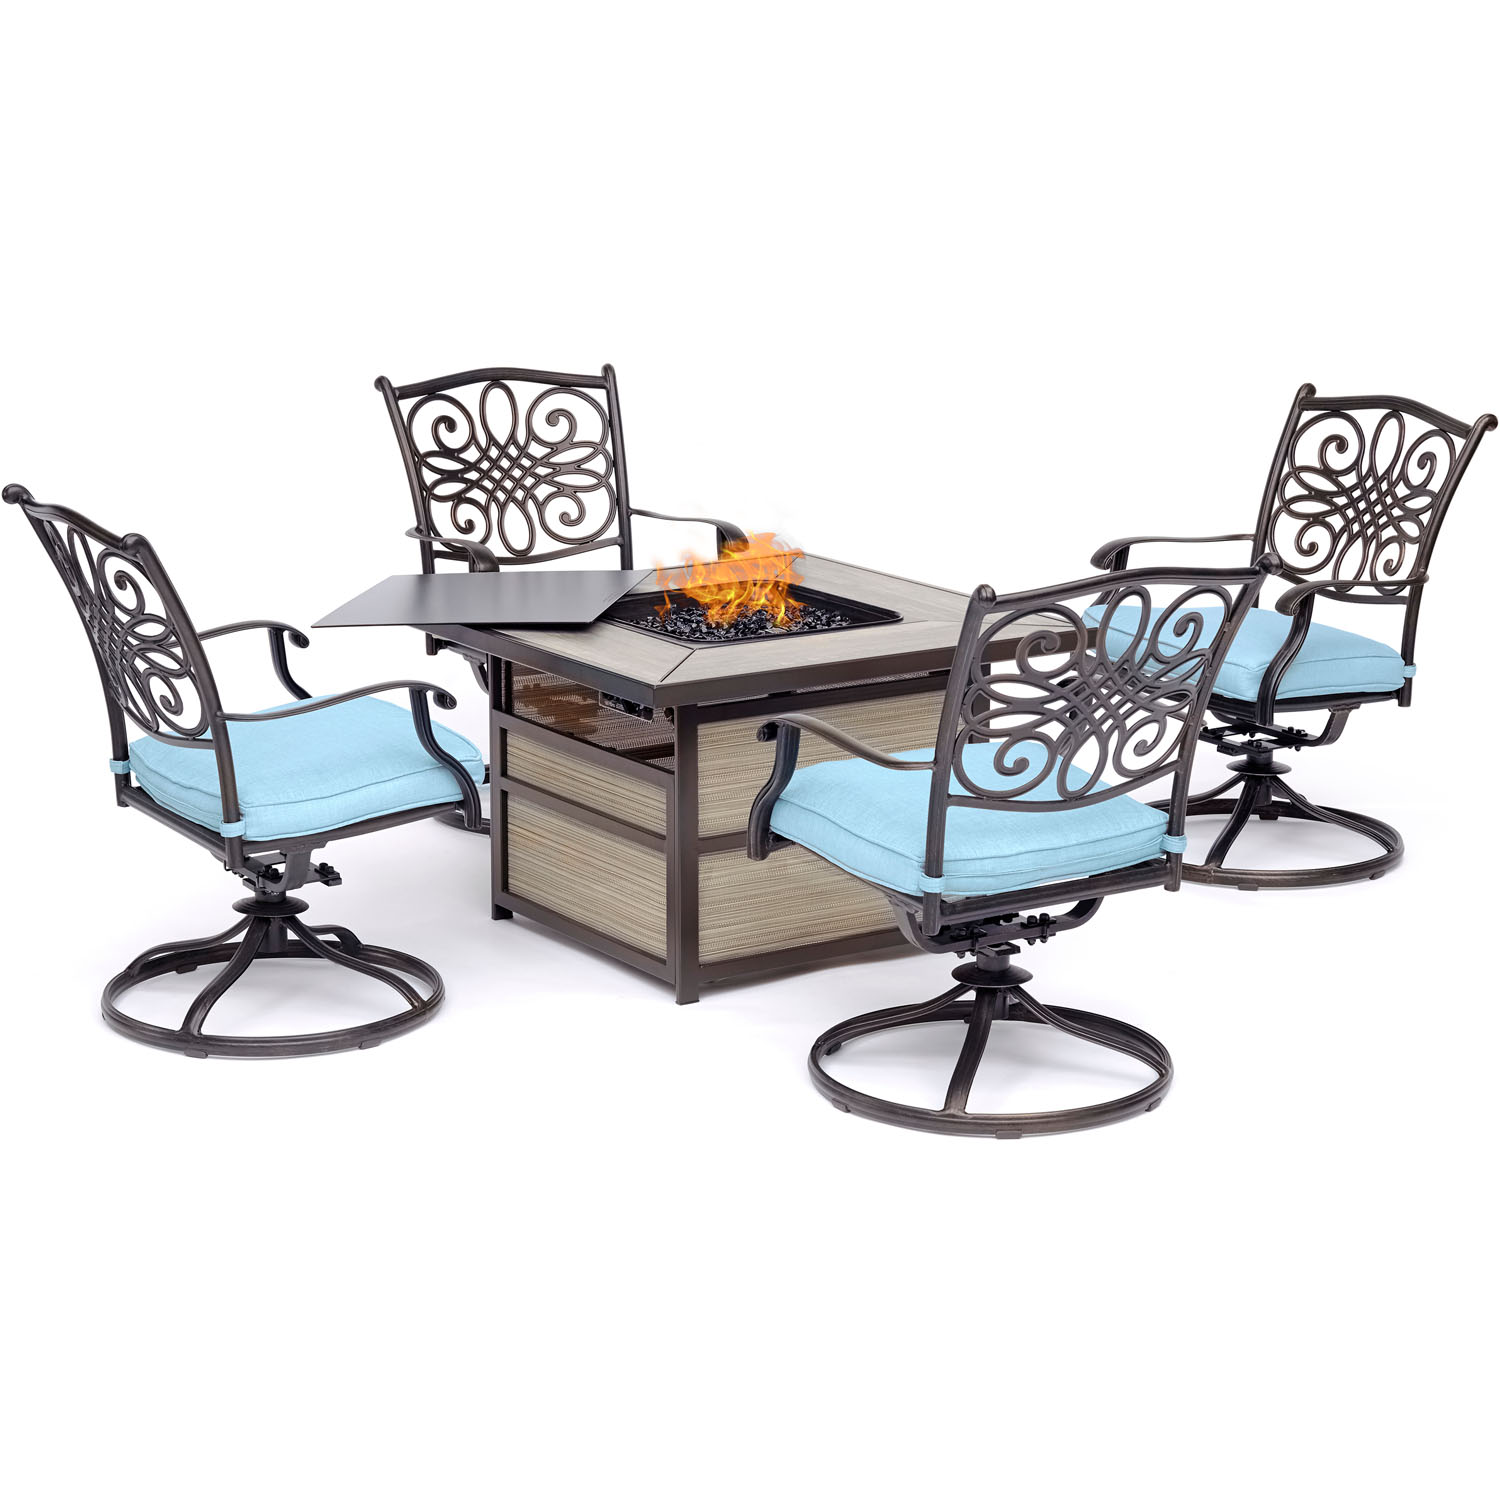 Hanover Traditions 5-Piece Aluminum Fire Pit Chat Set with 4 Swivel Rockers  Fire Pit Table, Blue - image 1 of 17